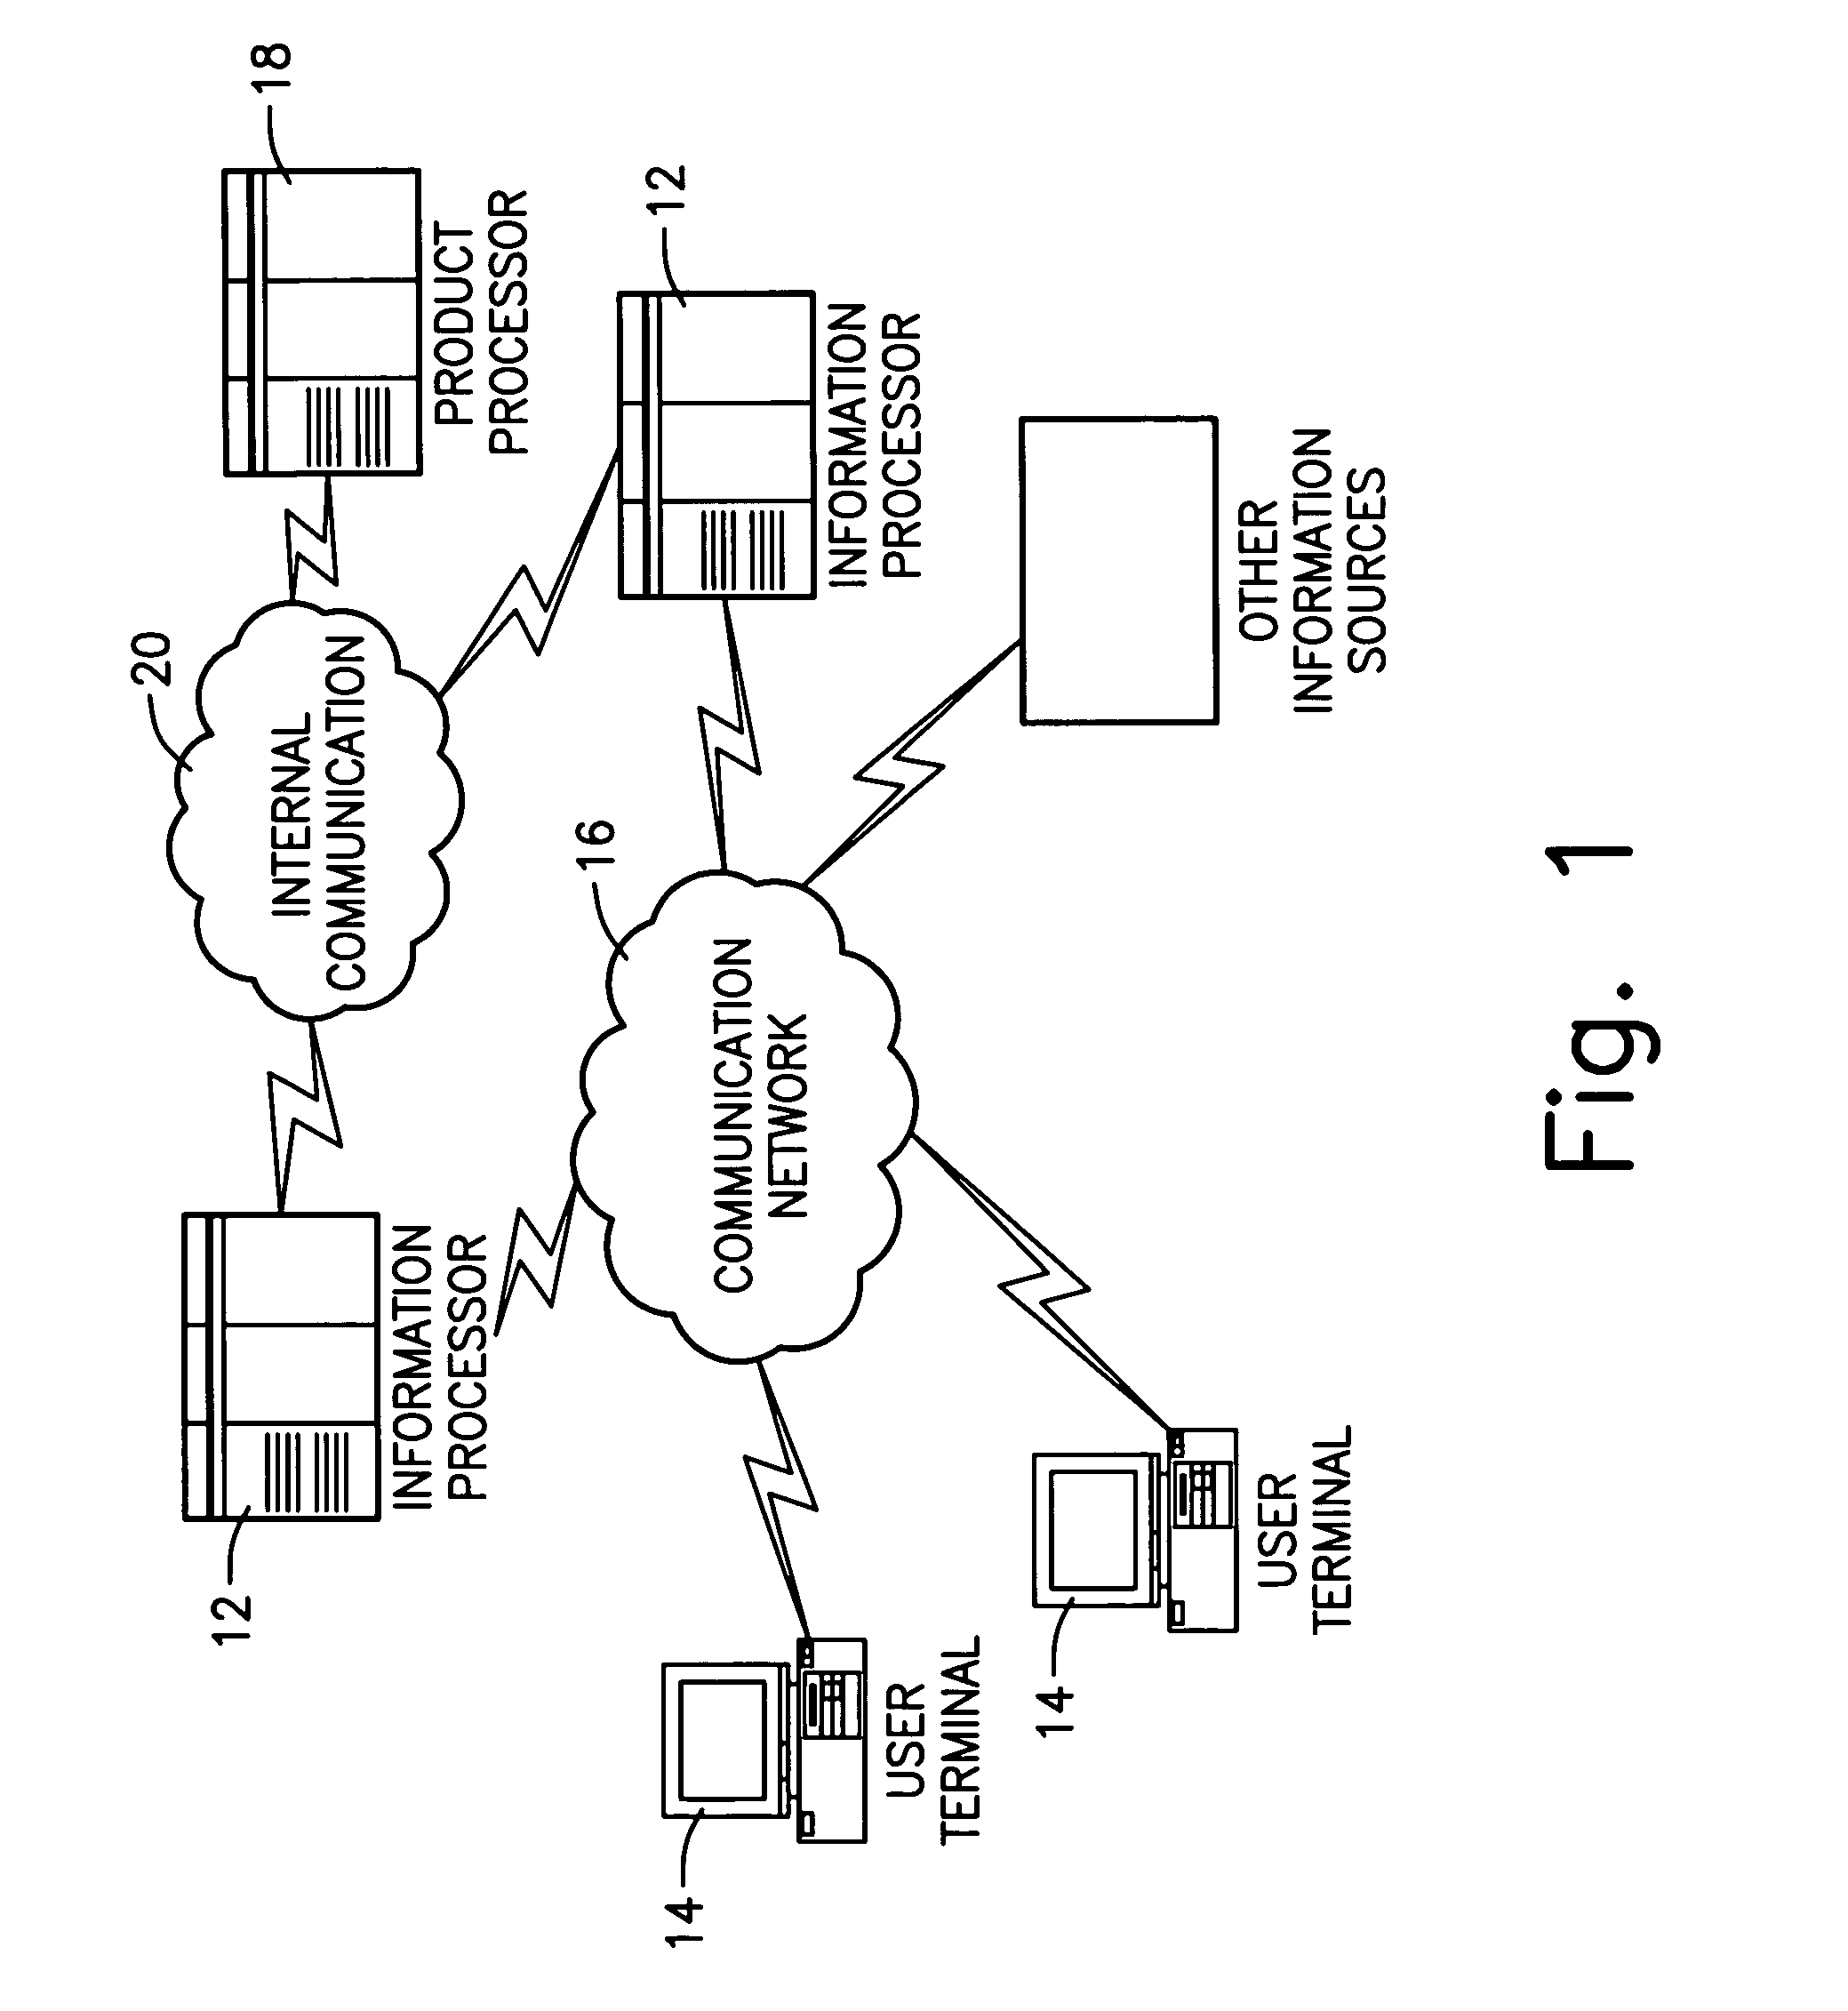 Network-based financial planning system and method